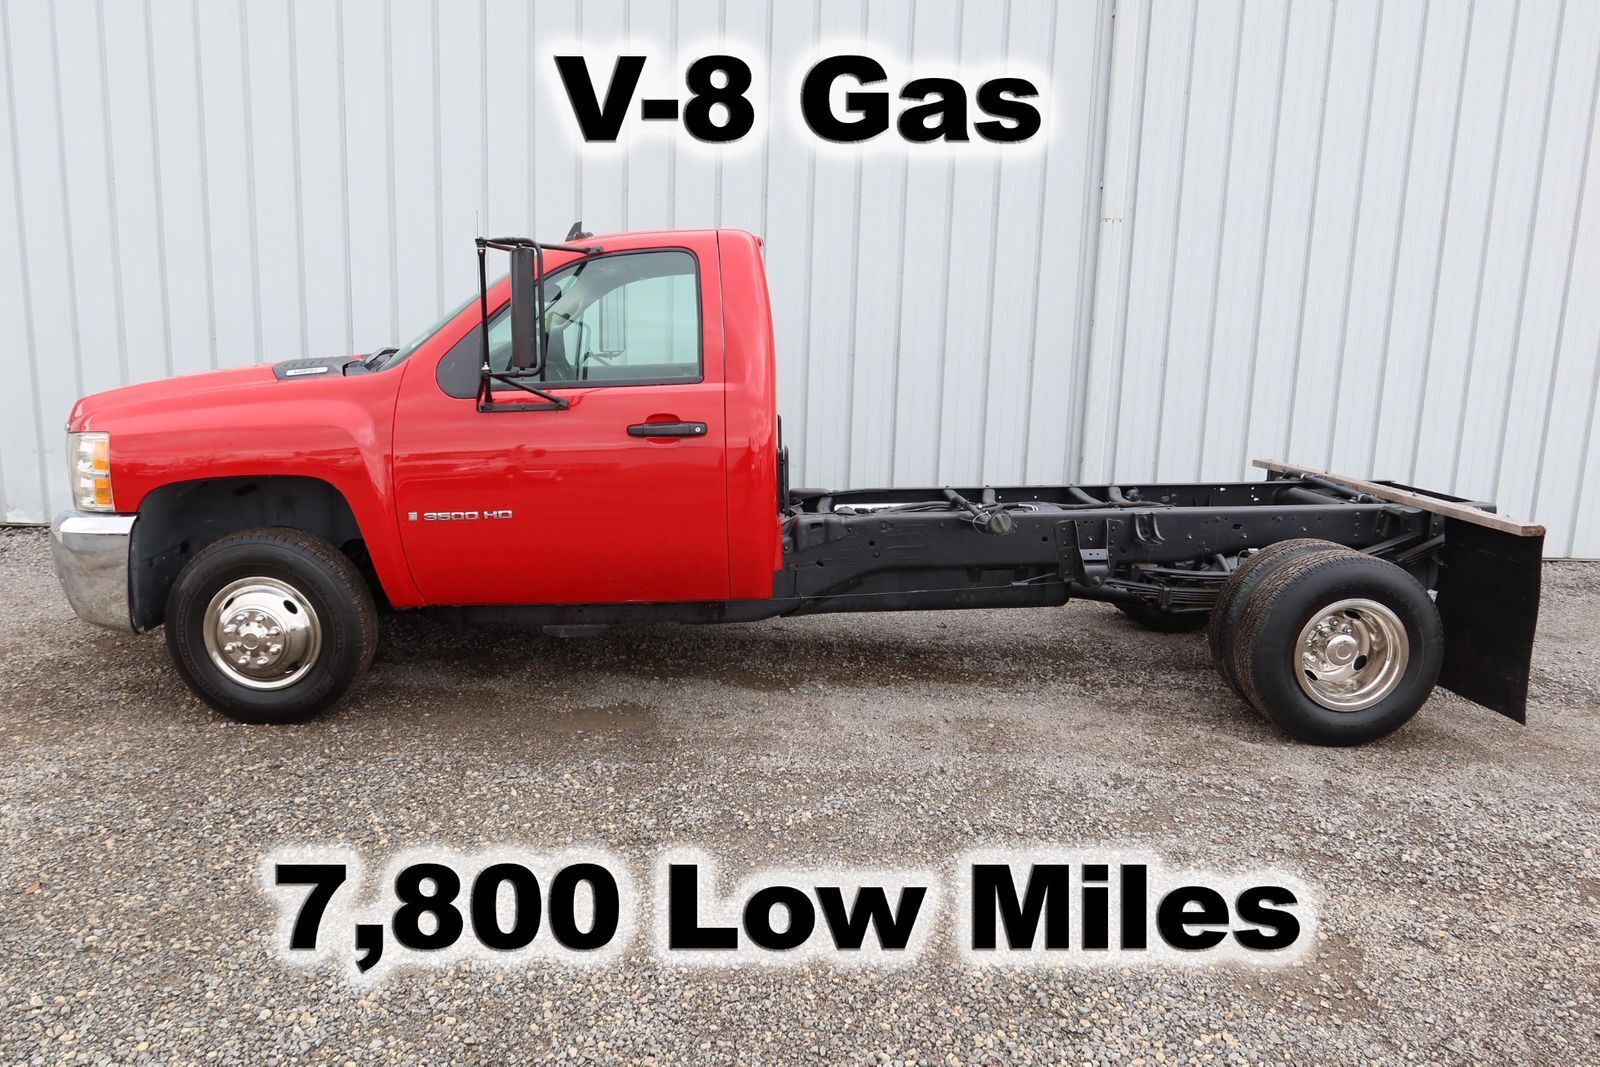 3500 Hd 6.0 Gas Automatic Cab Chassis Haul Deliver Dump Box Truck 7,800 Low Mile